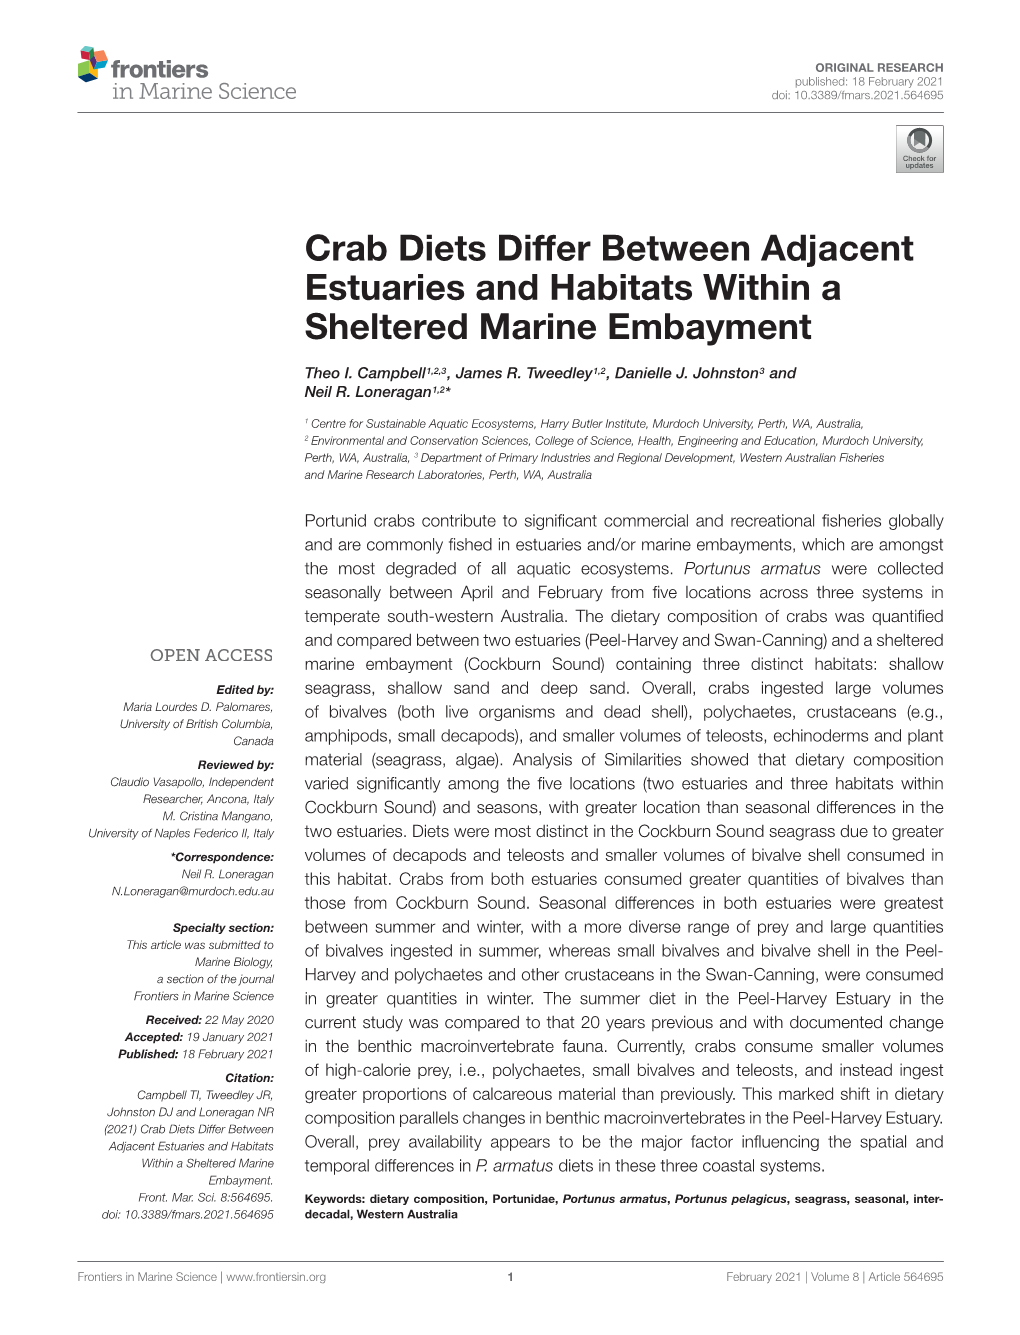 Crab Diets Differ Between Adjacent Estuaries and Habitats Within a Sheltered Marine Embayment